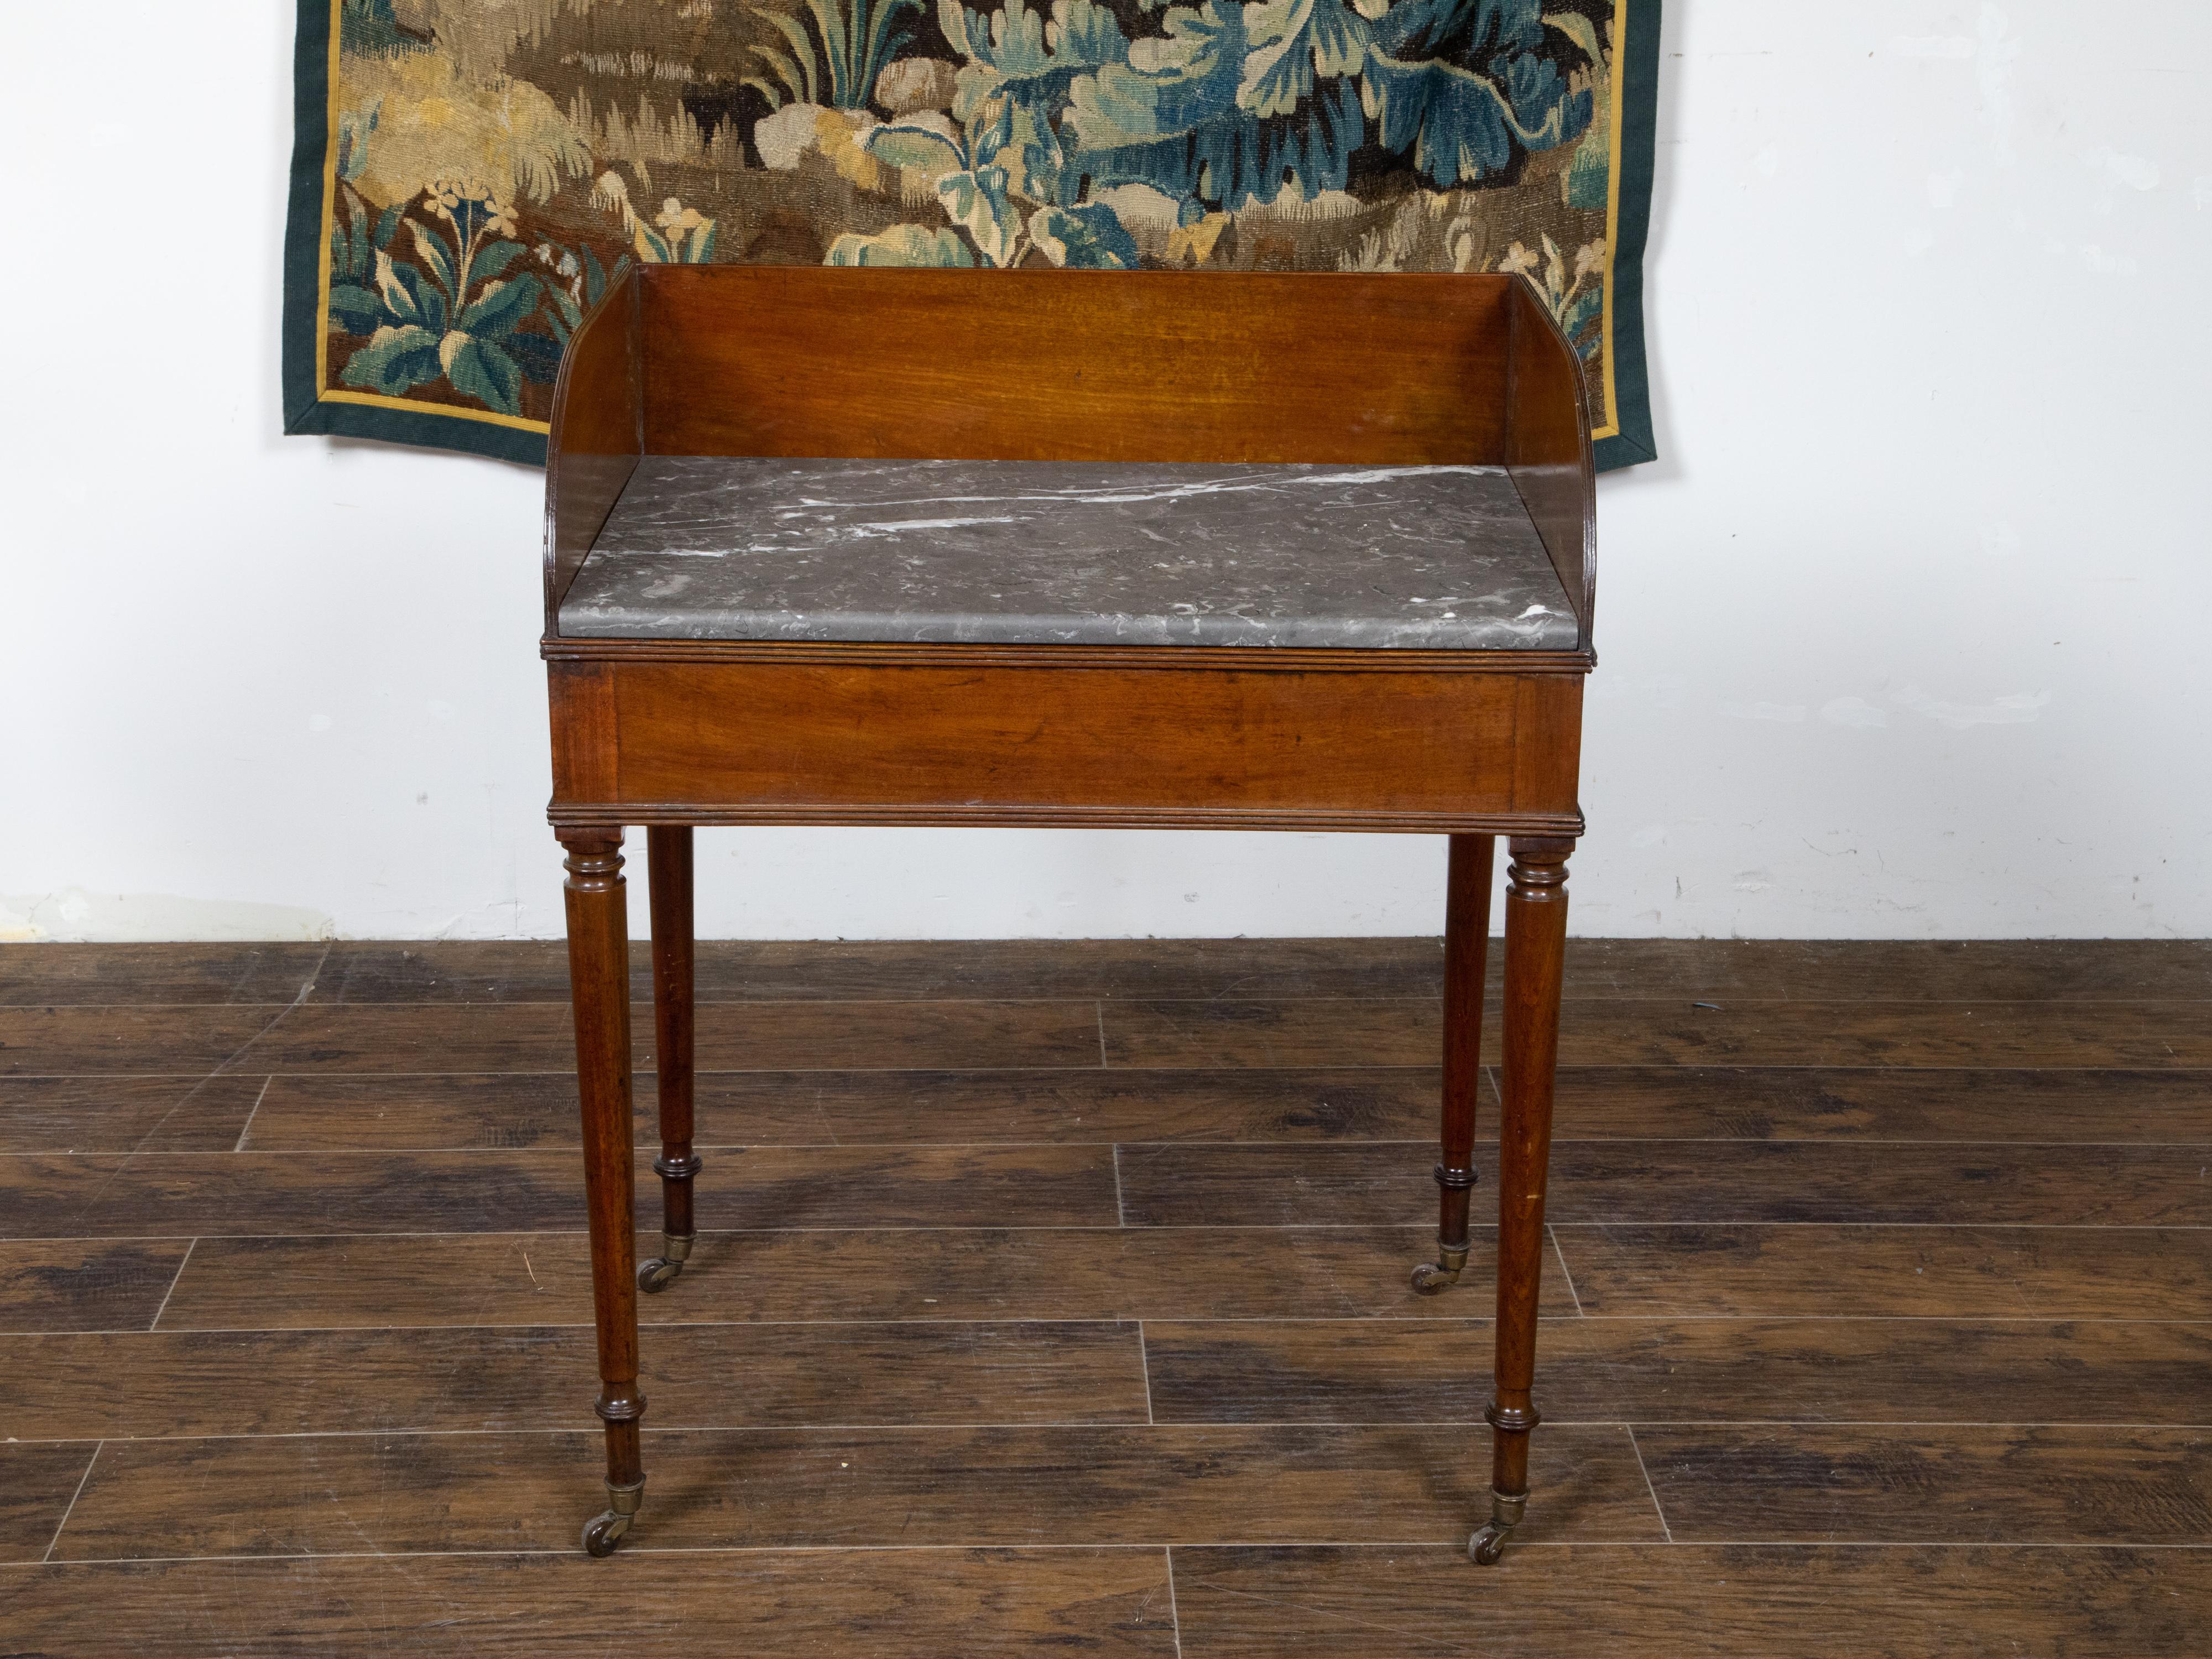 An English mahogany washstand table from the Mid-19th Century, with grey veined marble top, three-quarter frame, turned legs and brass casters. Created in England during the second quarter of the 19th century, this mahogany washstand table features